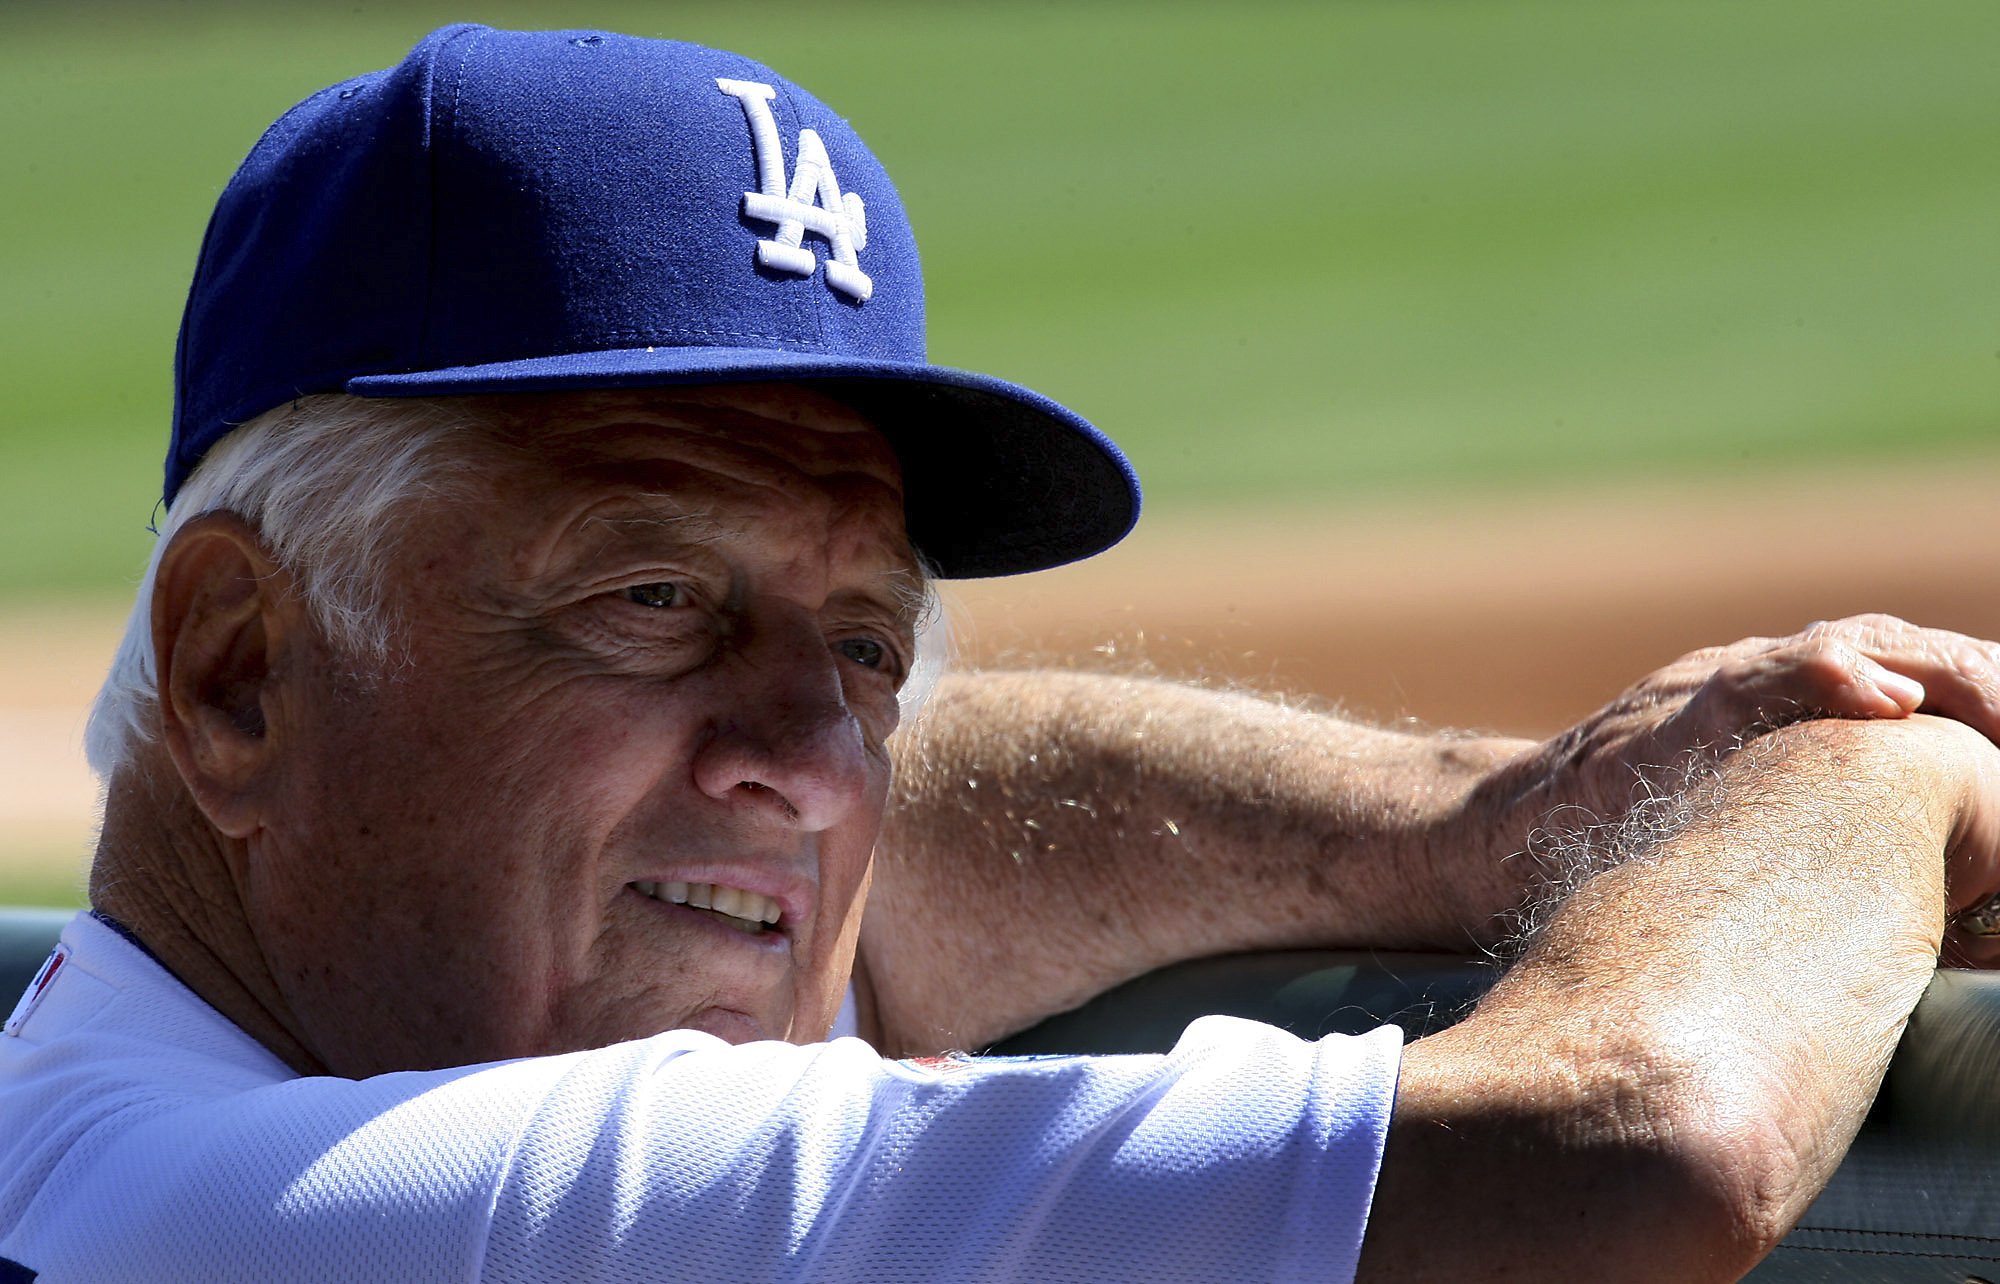 Lasorda, fiery Hall of Fame Dodgers manager, dies at 93